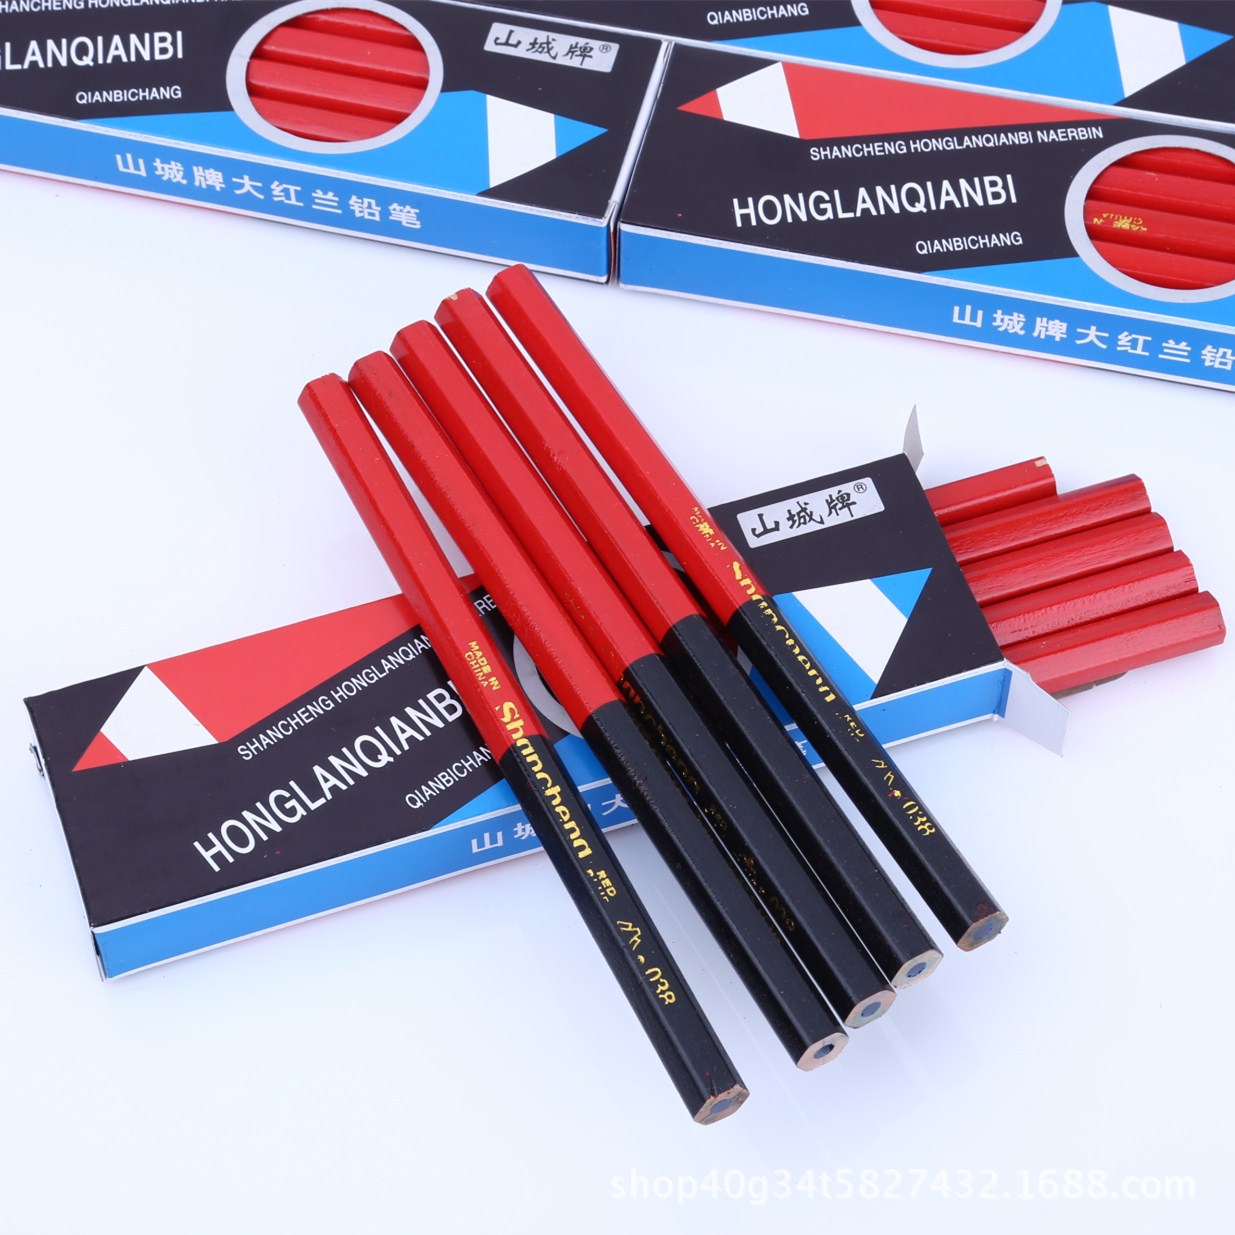 Mountain brand carpentry pencil Dedicated Star anise pencil Red and blue Oblate Crossed Dedicated carpentry pencil